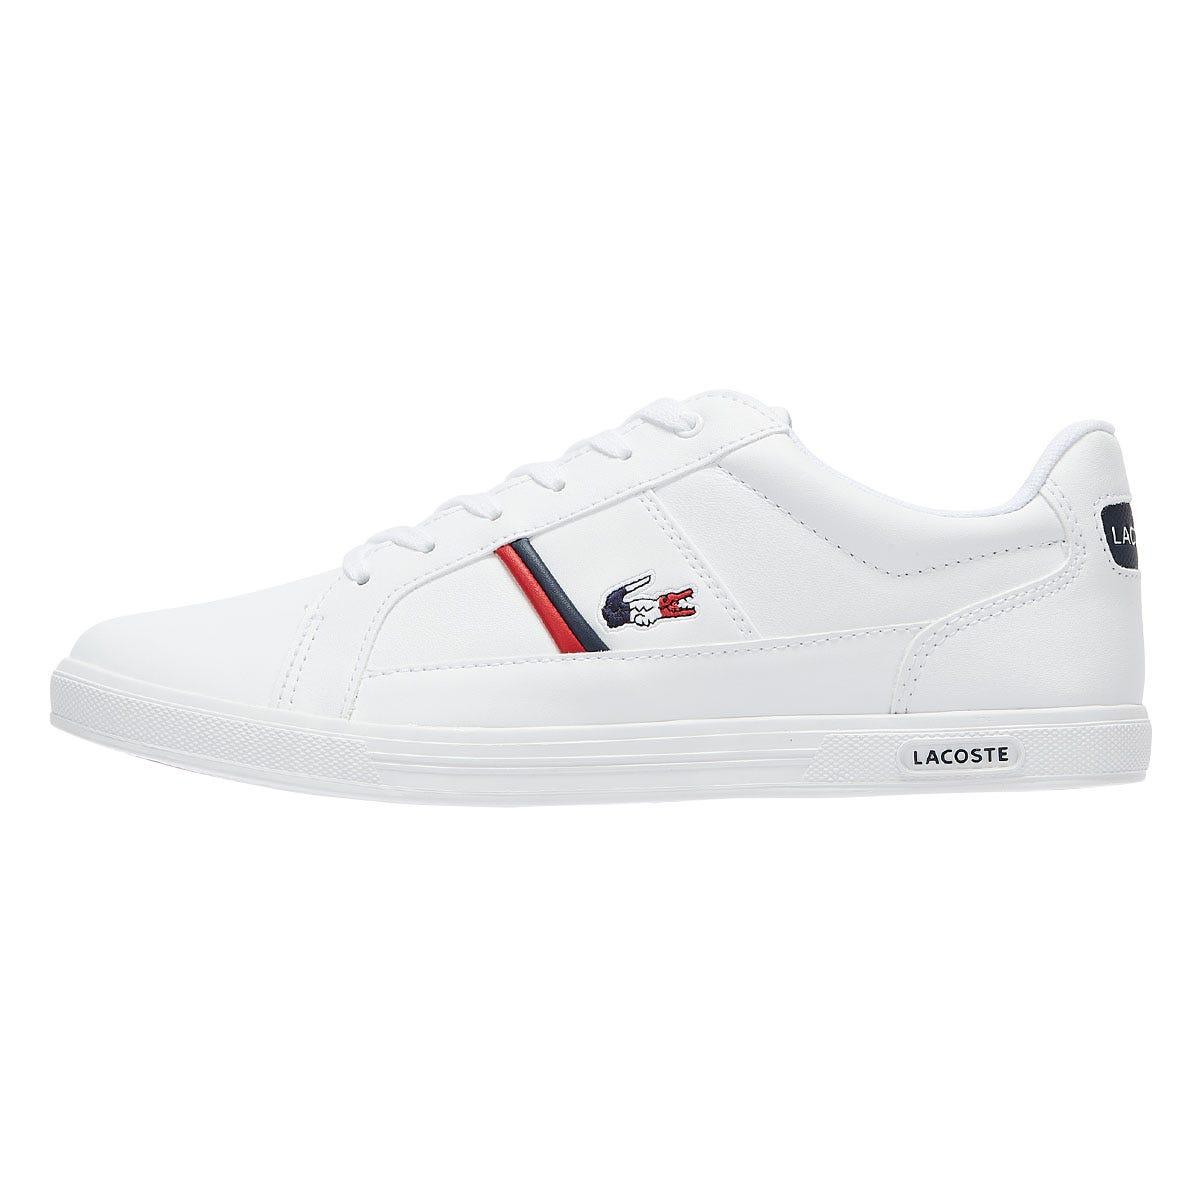 Lacoste Leather Europa Tri 1 Trainers in White Men - Lyst